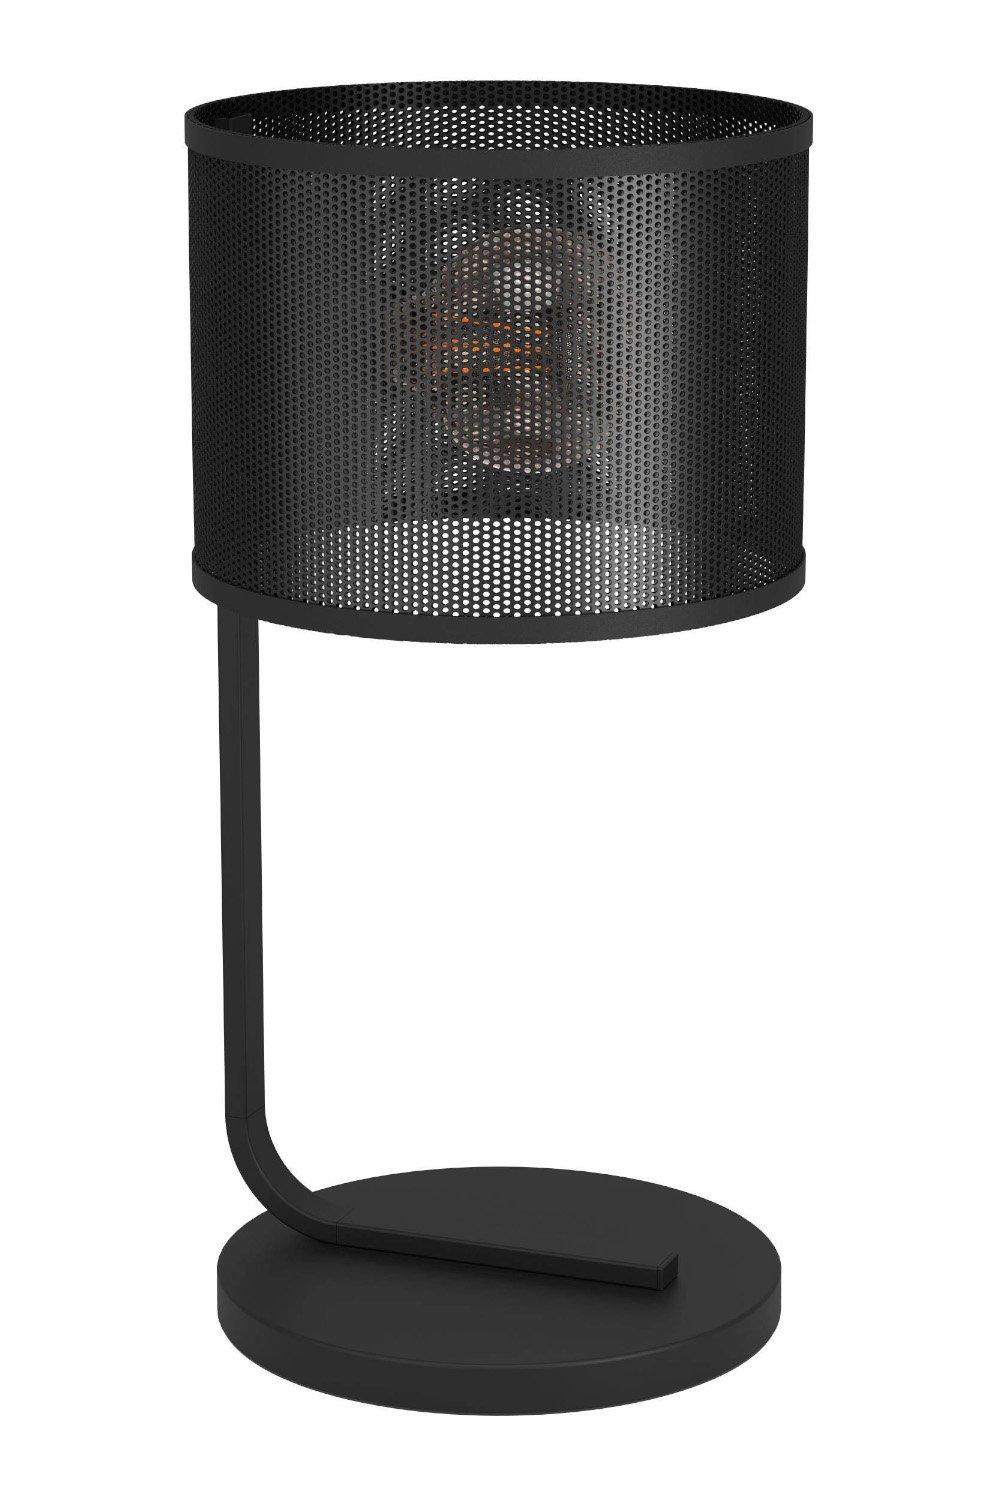 Manby Industrial Mesh Table Light